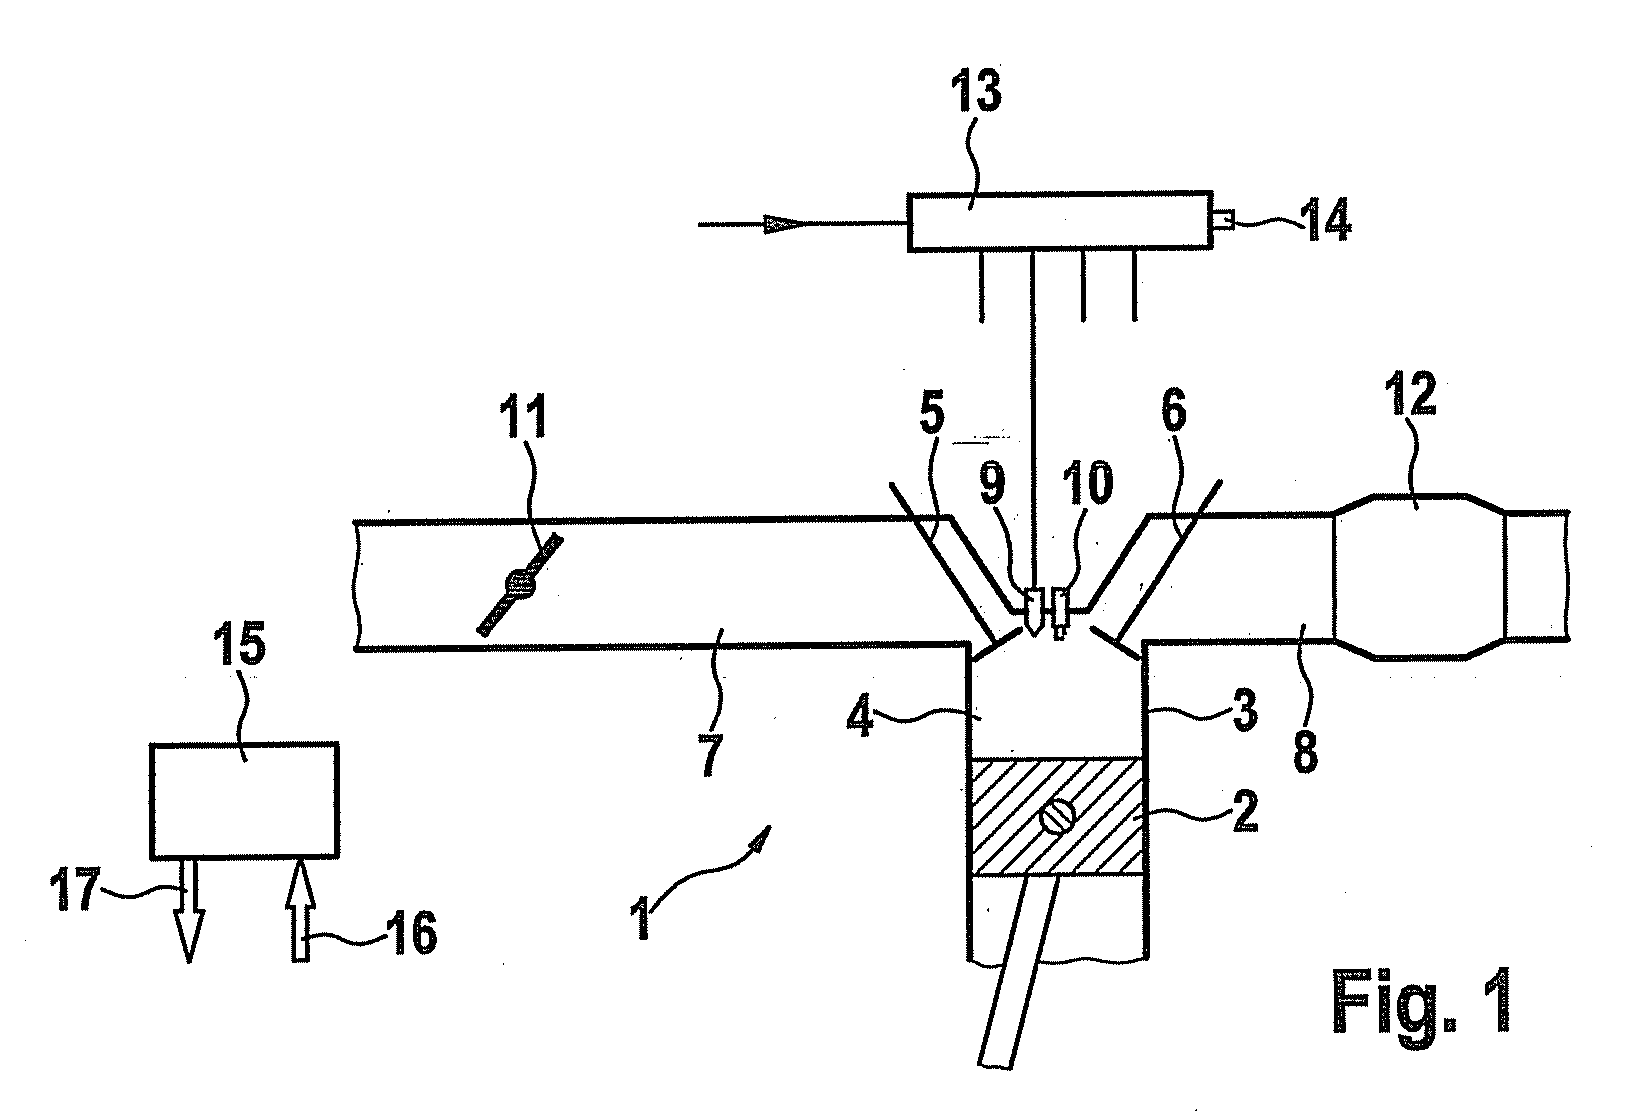 Method for operating an internal combustion engine using externally supplied ignition